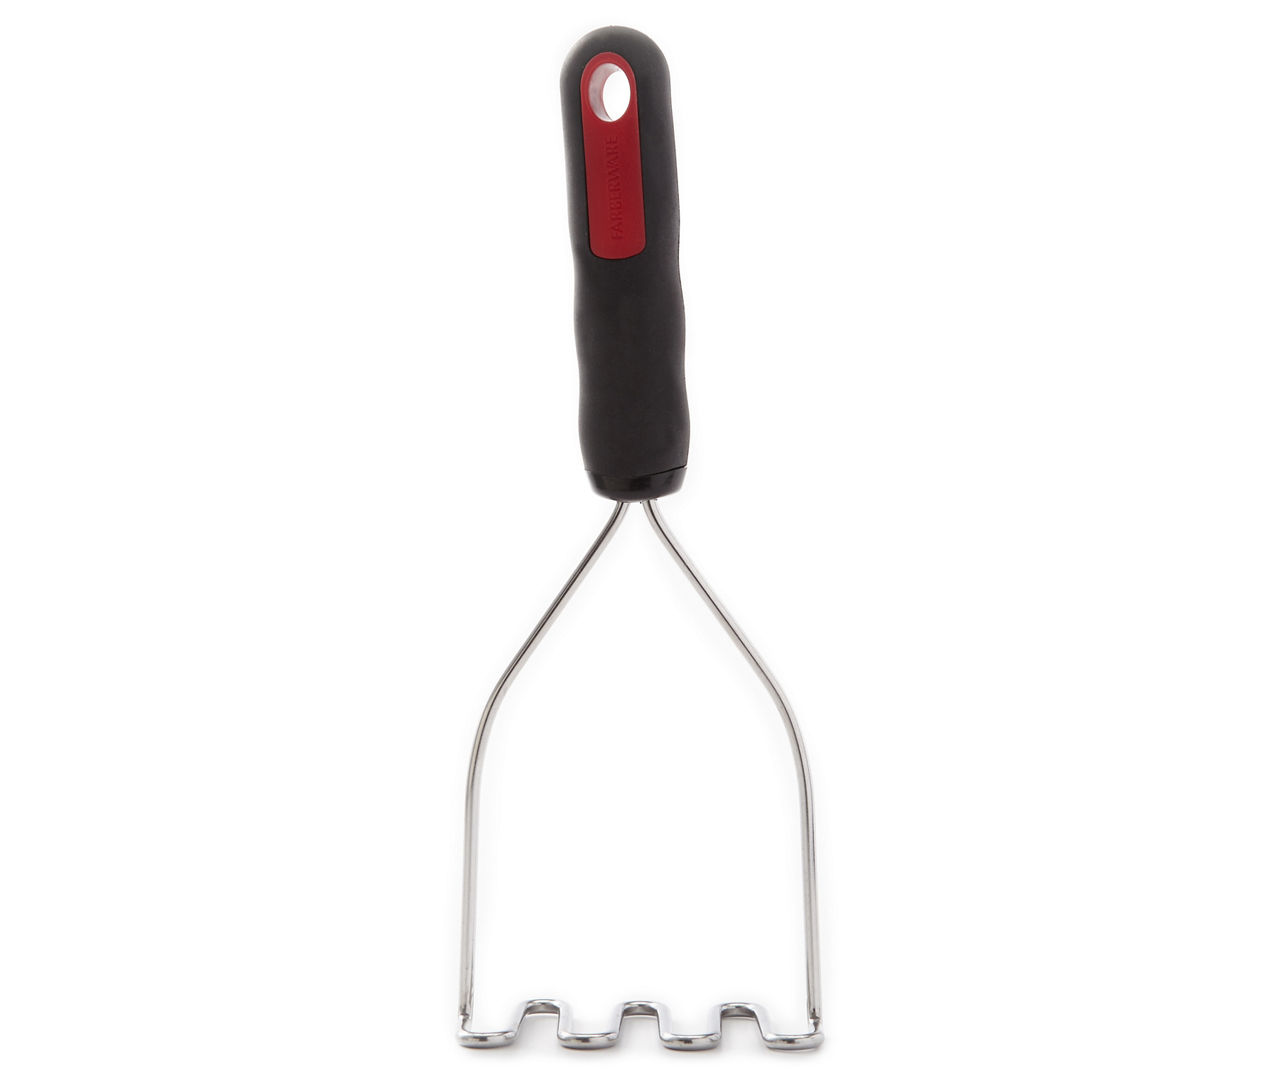 Farberware Professional Stainless Steel Potato Masher with Black Handle 